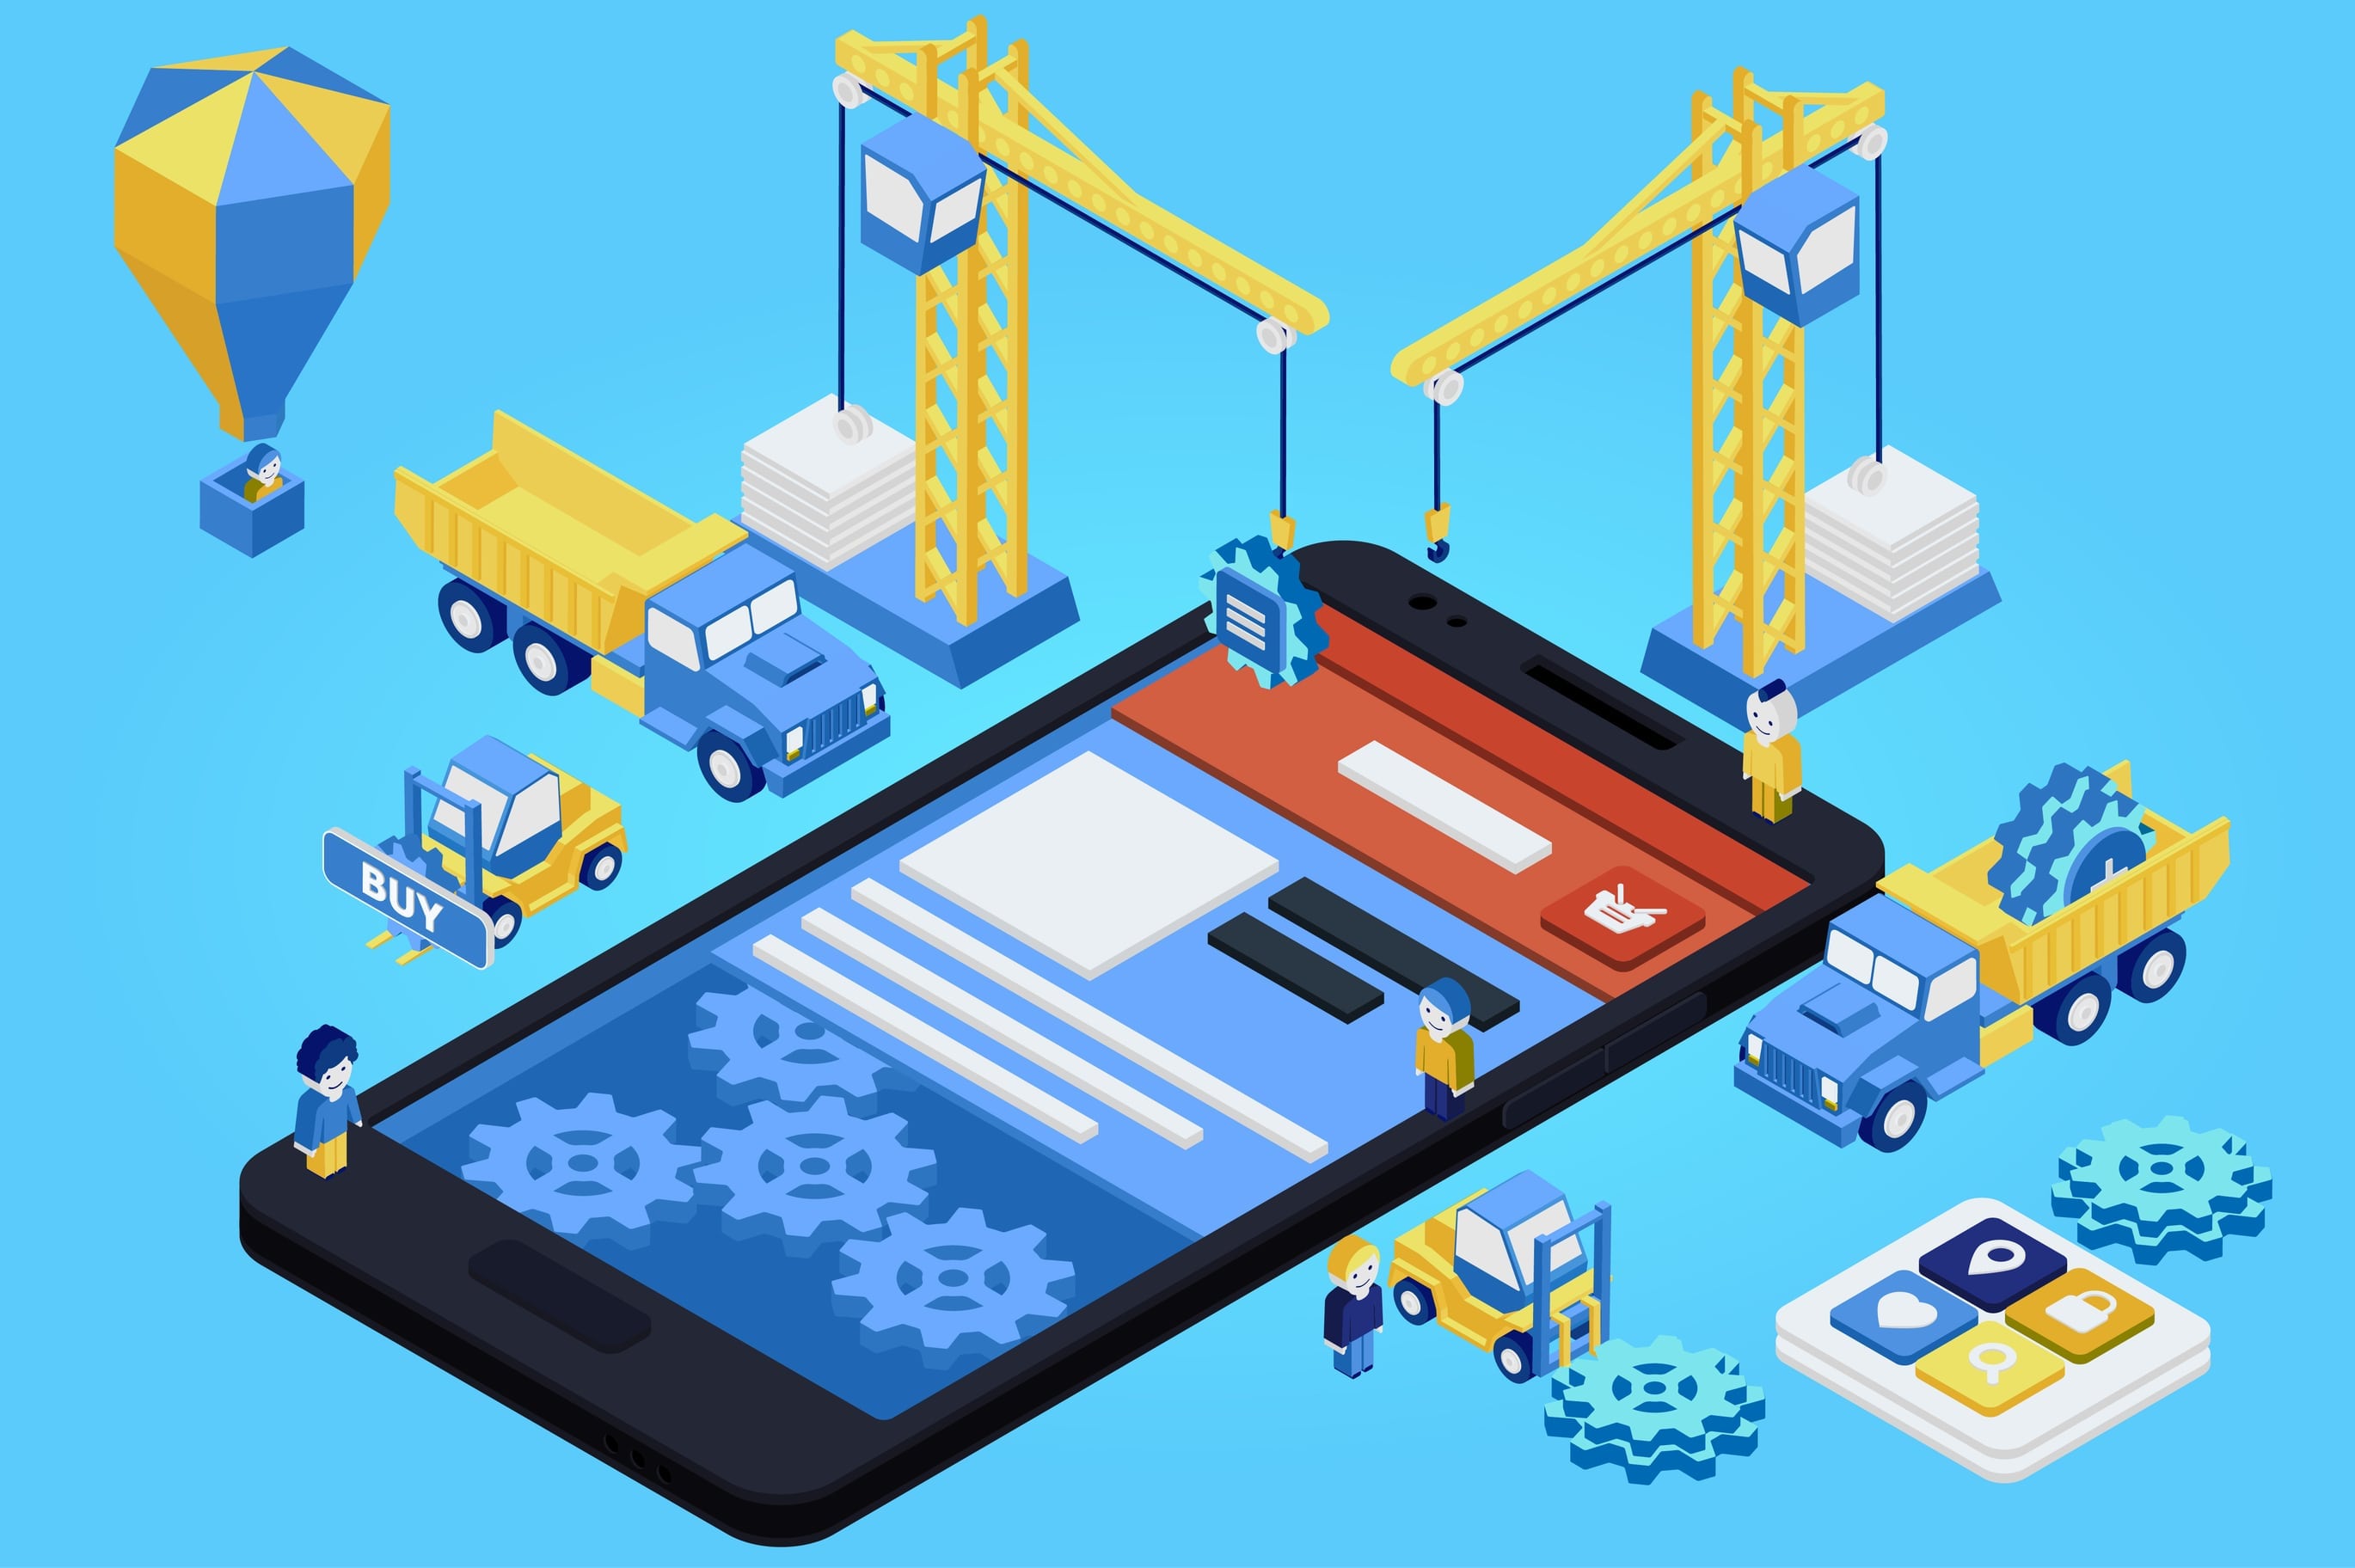 How to build a successful mobile app: Focus on the product ...